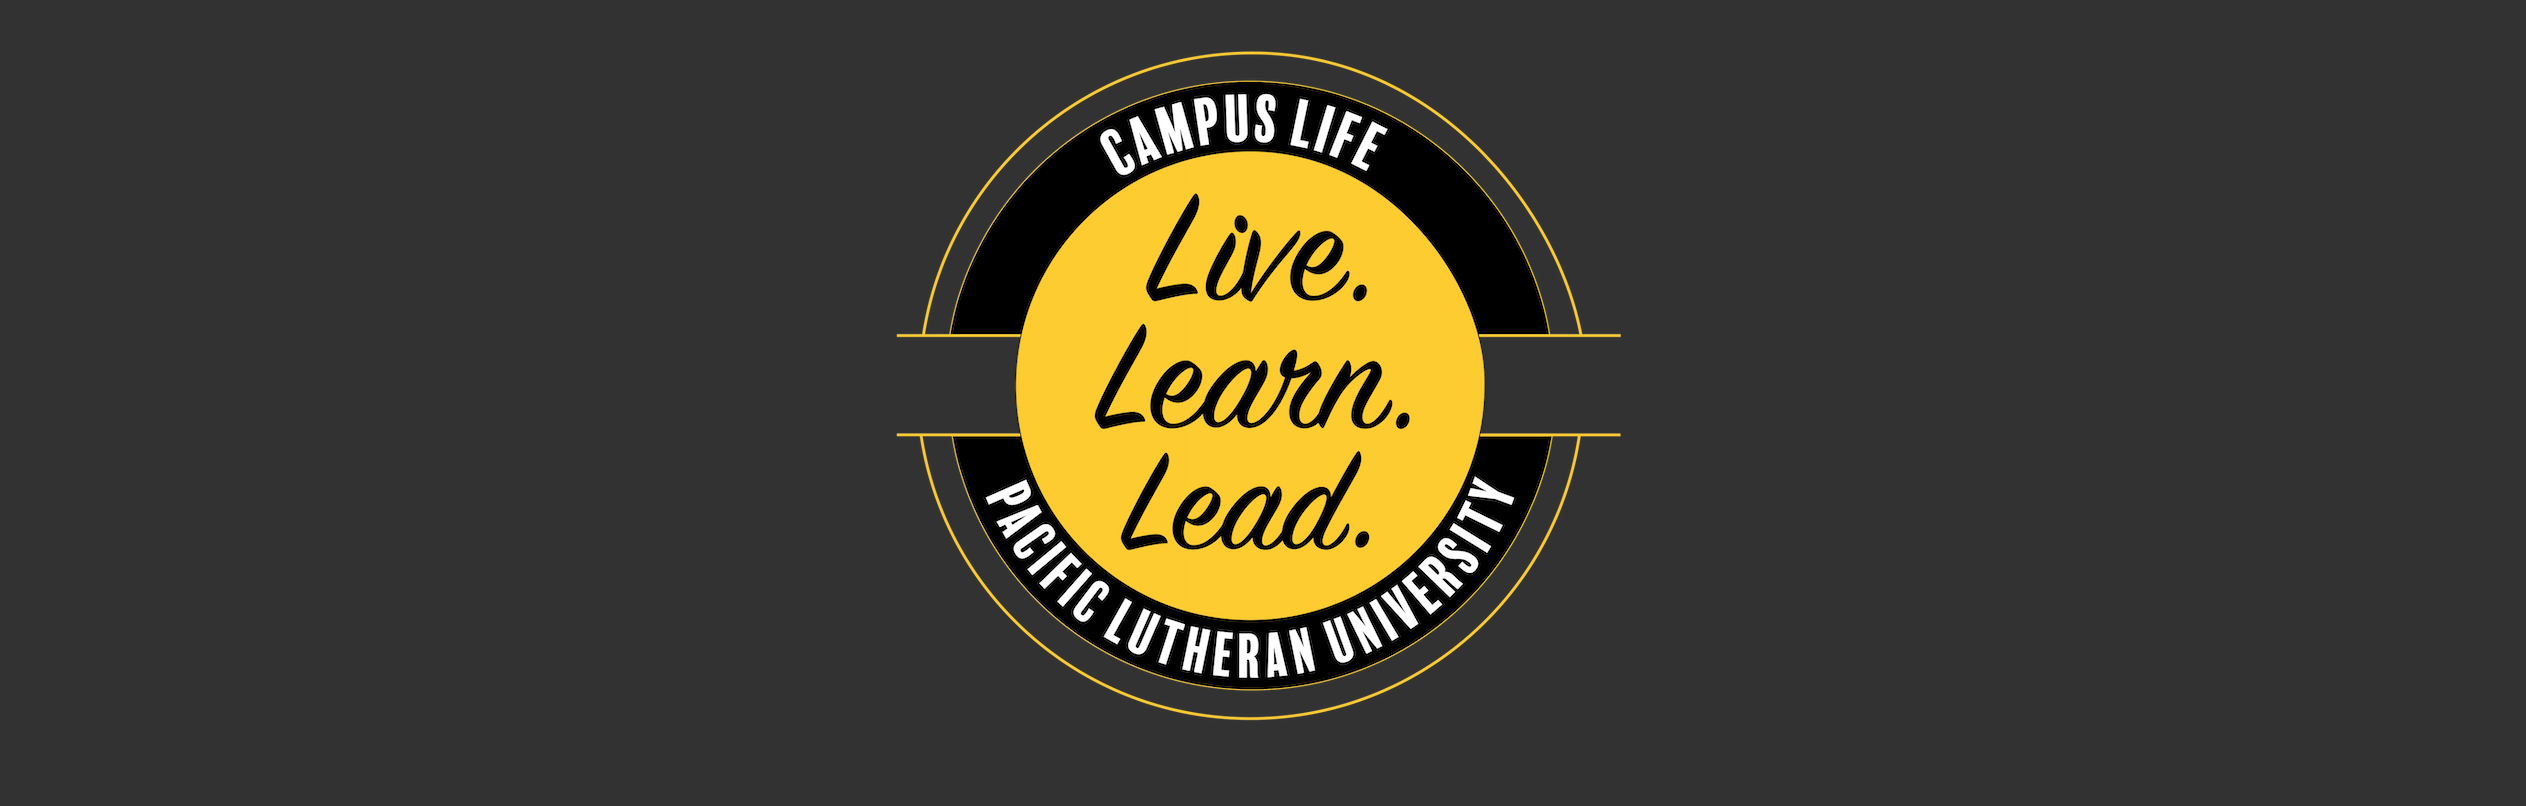 Campus Life: Live, Learn, Lead.